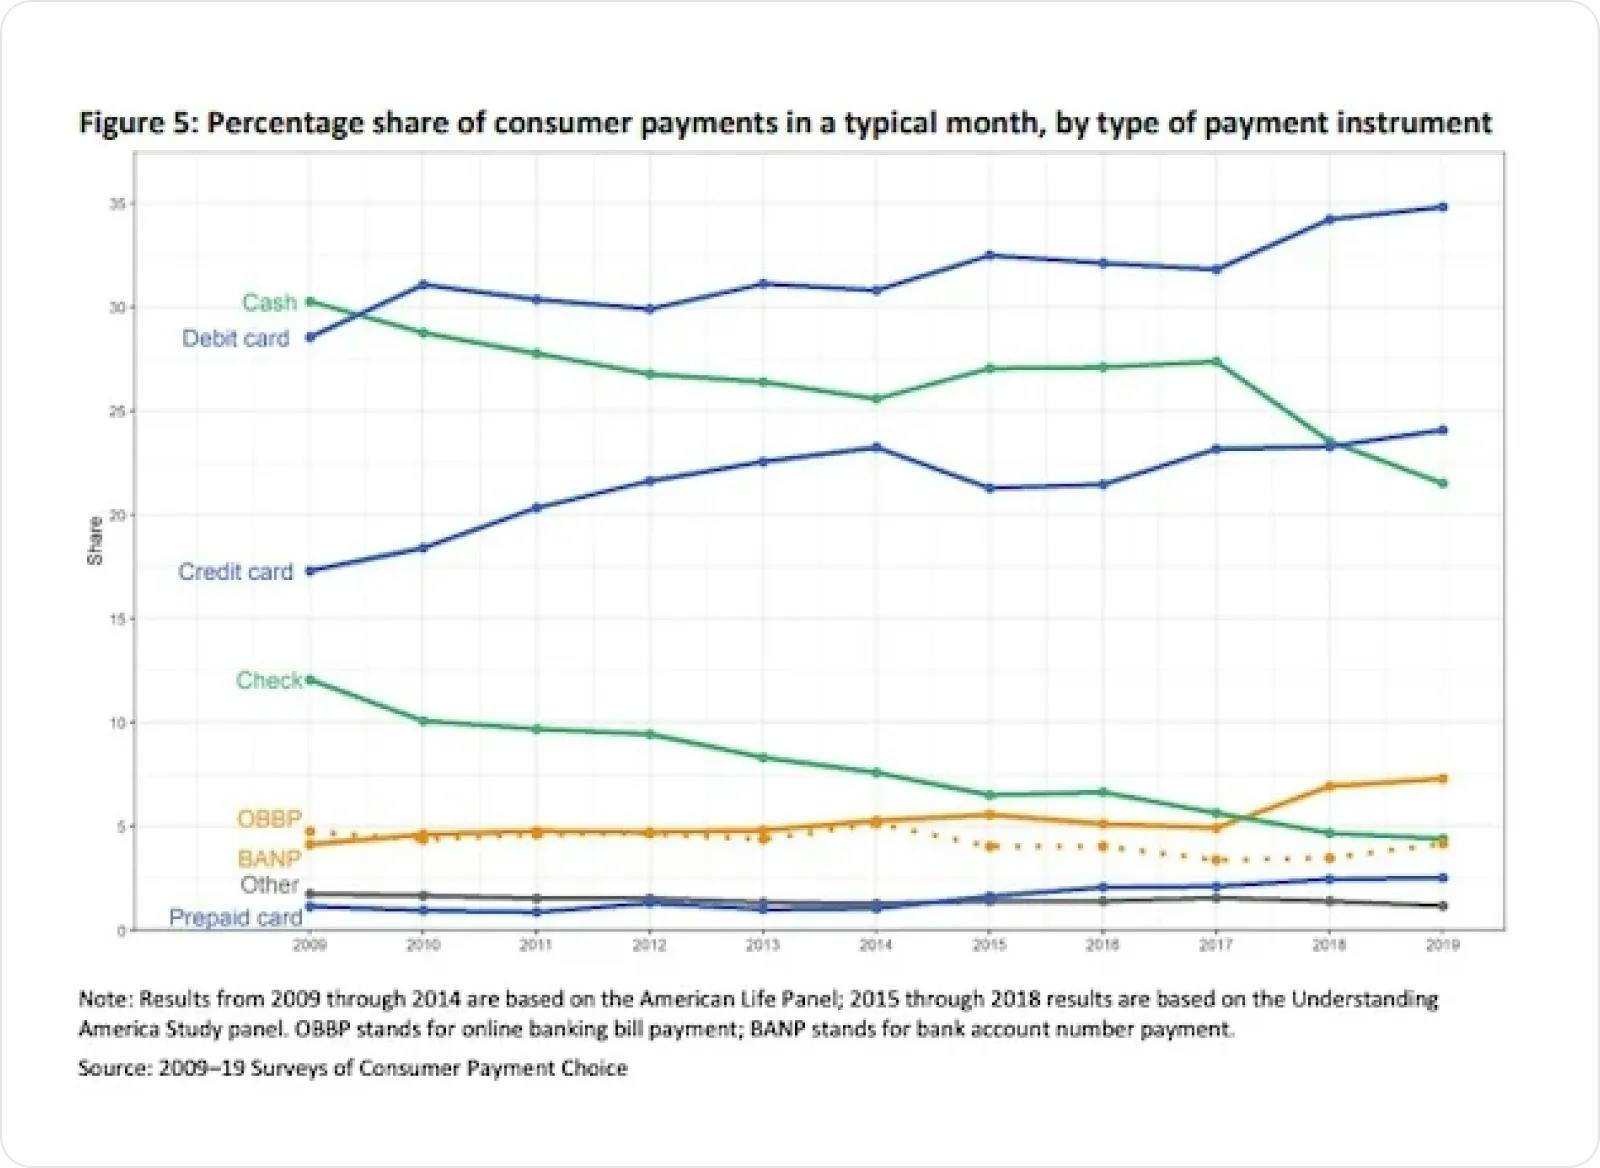 Percentage share of consumer payments in a typical month graph